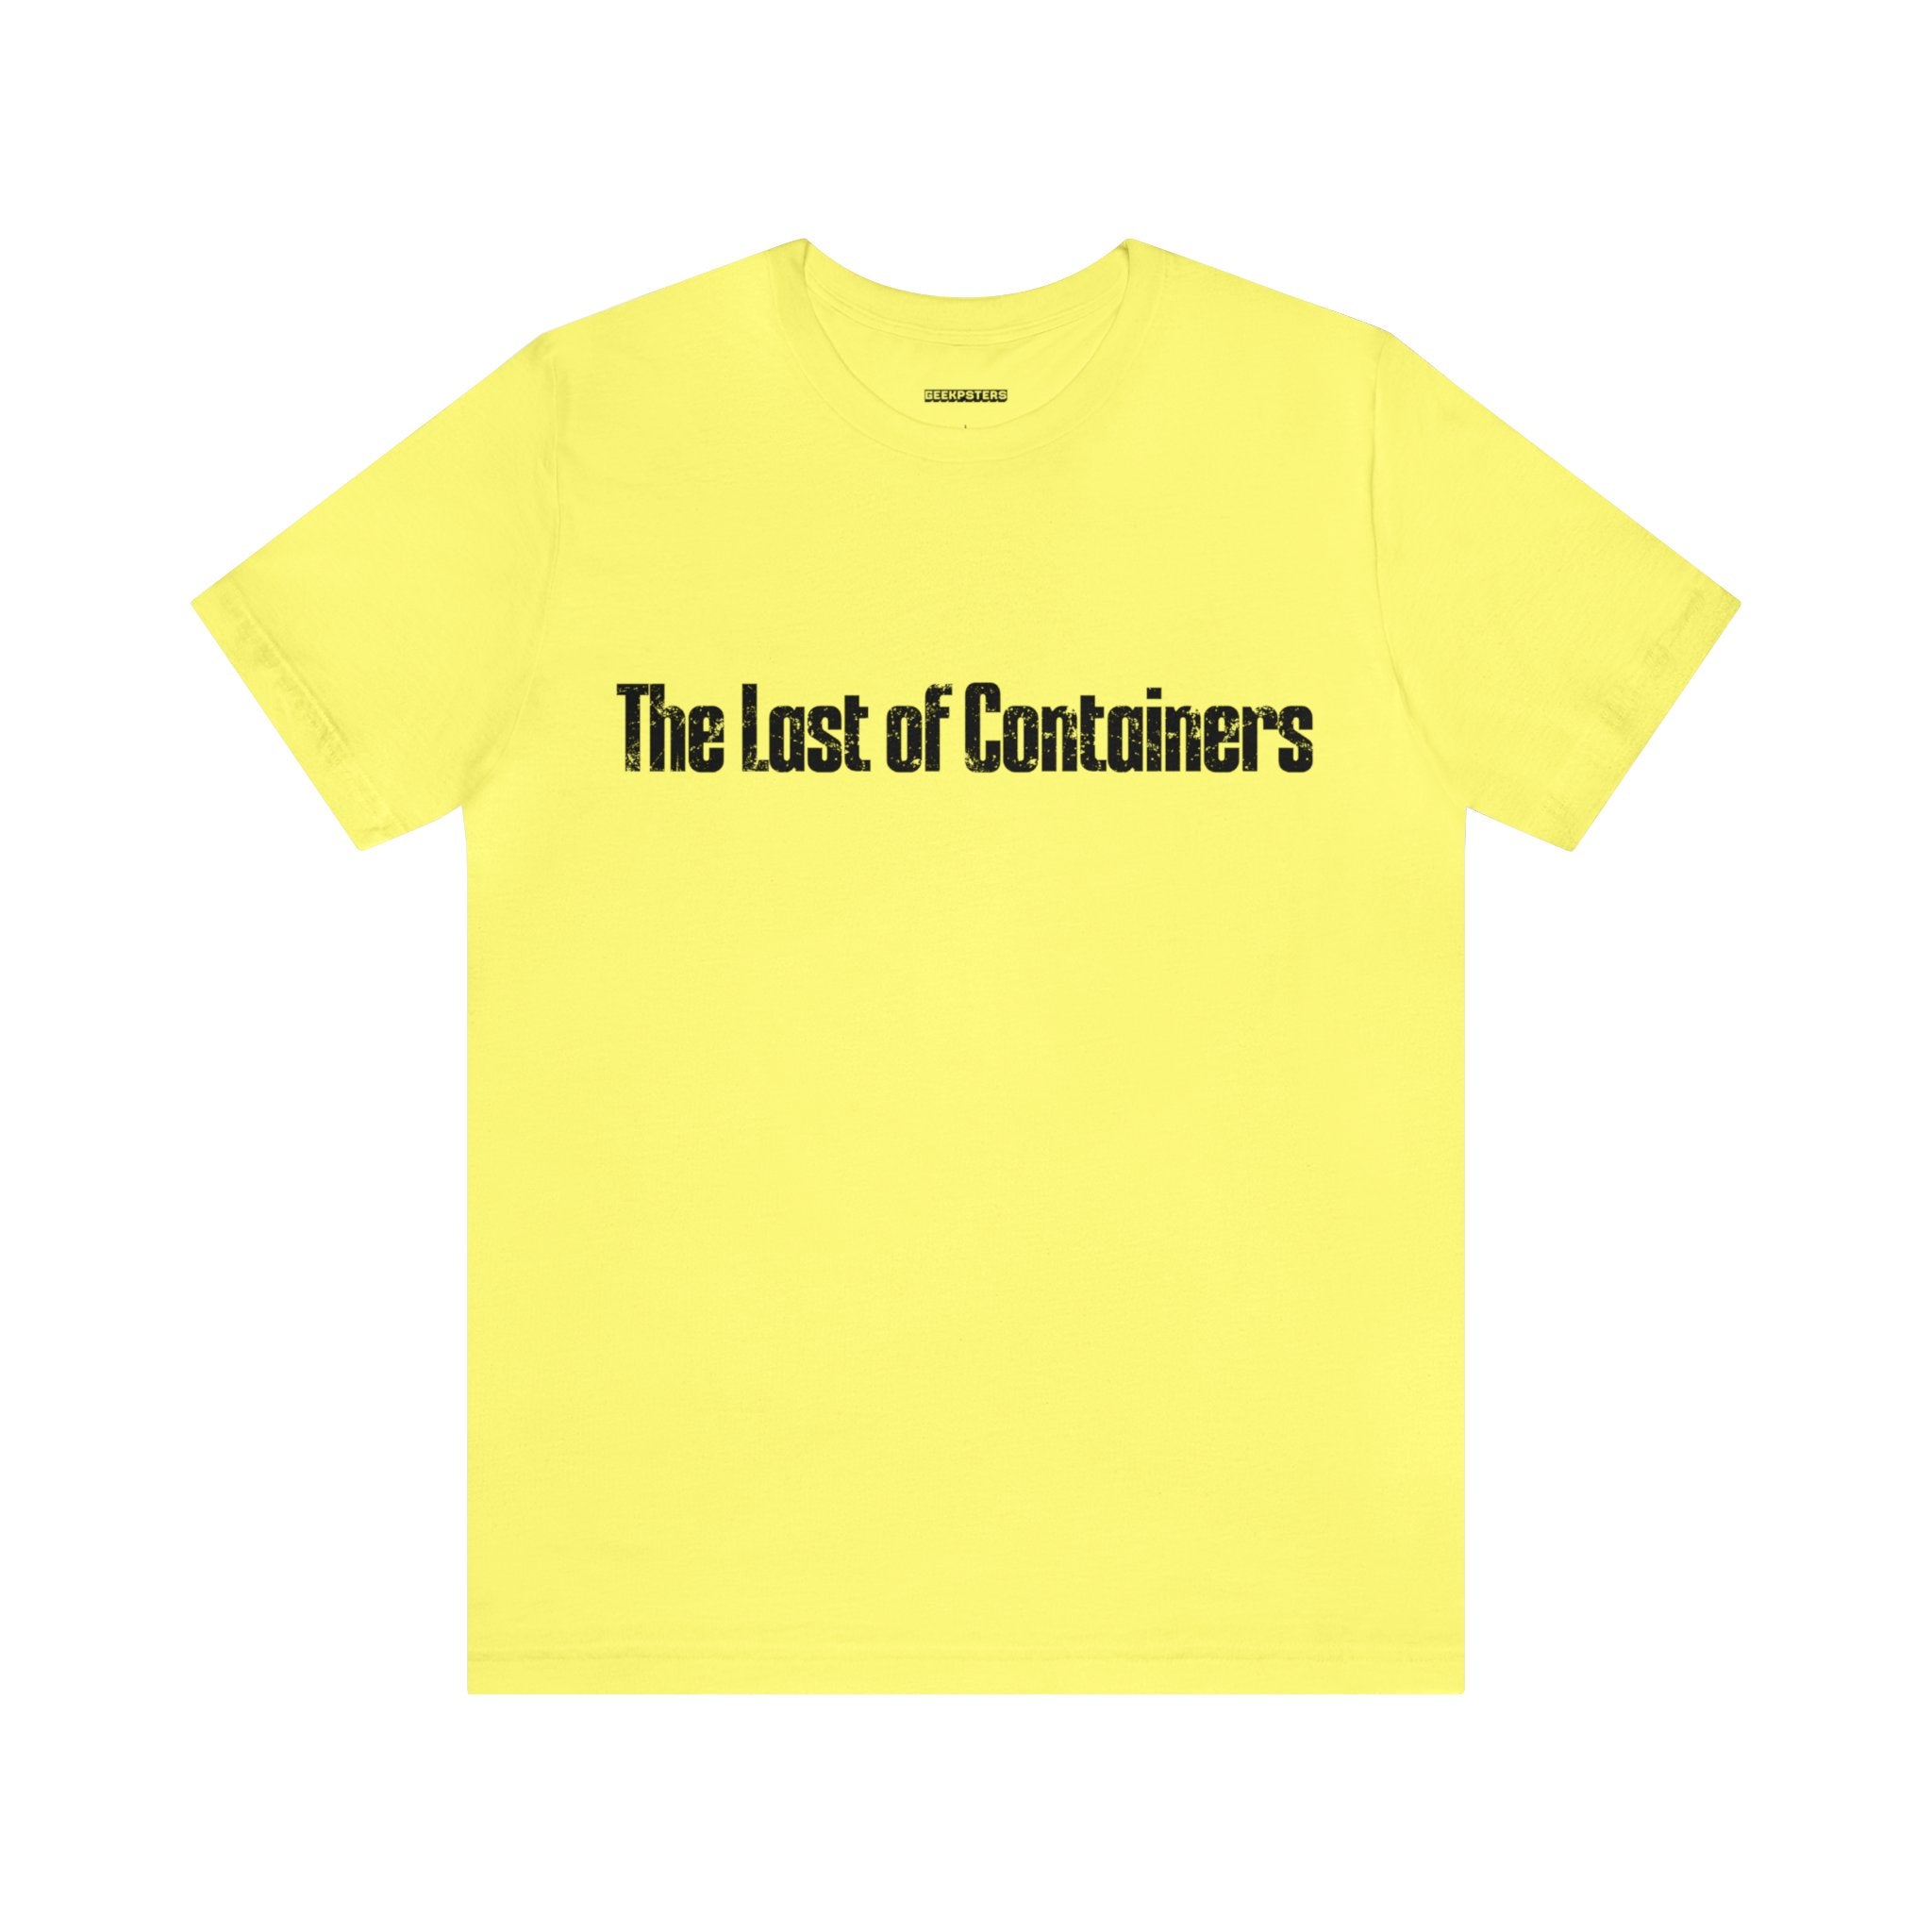 The last of Containers Tee Shirt